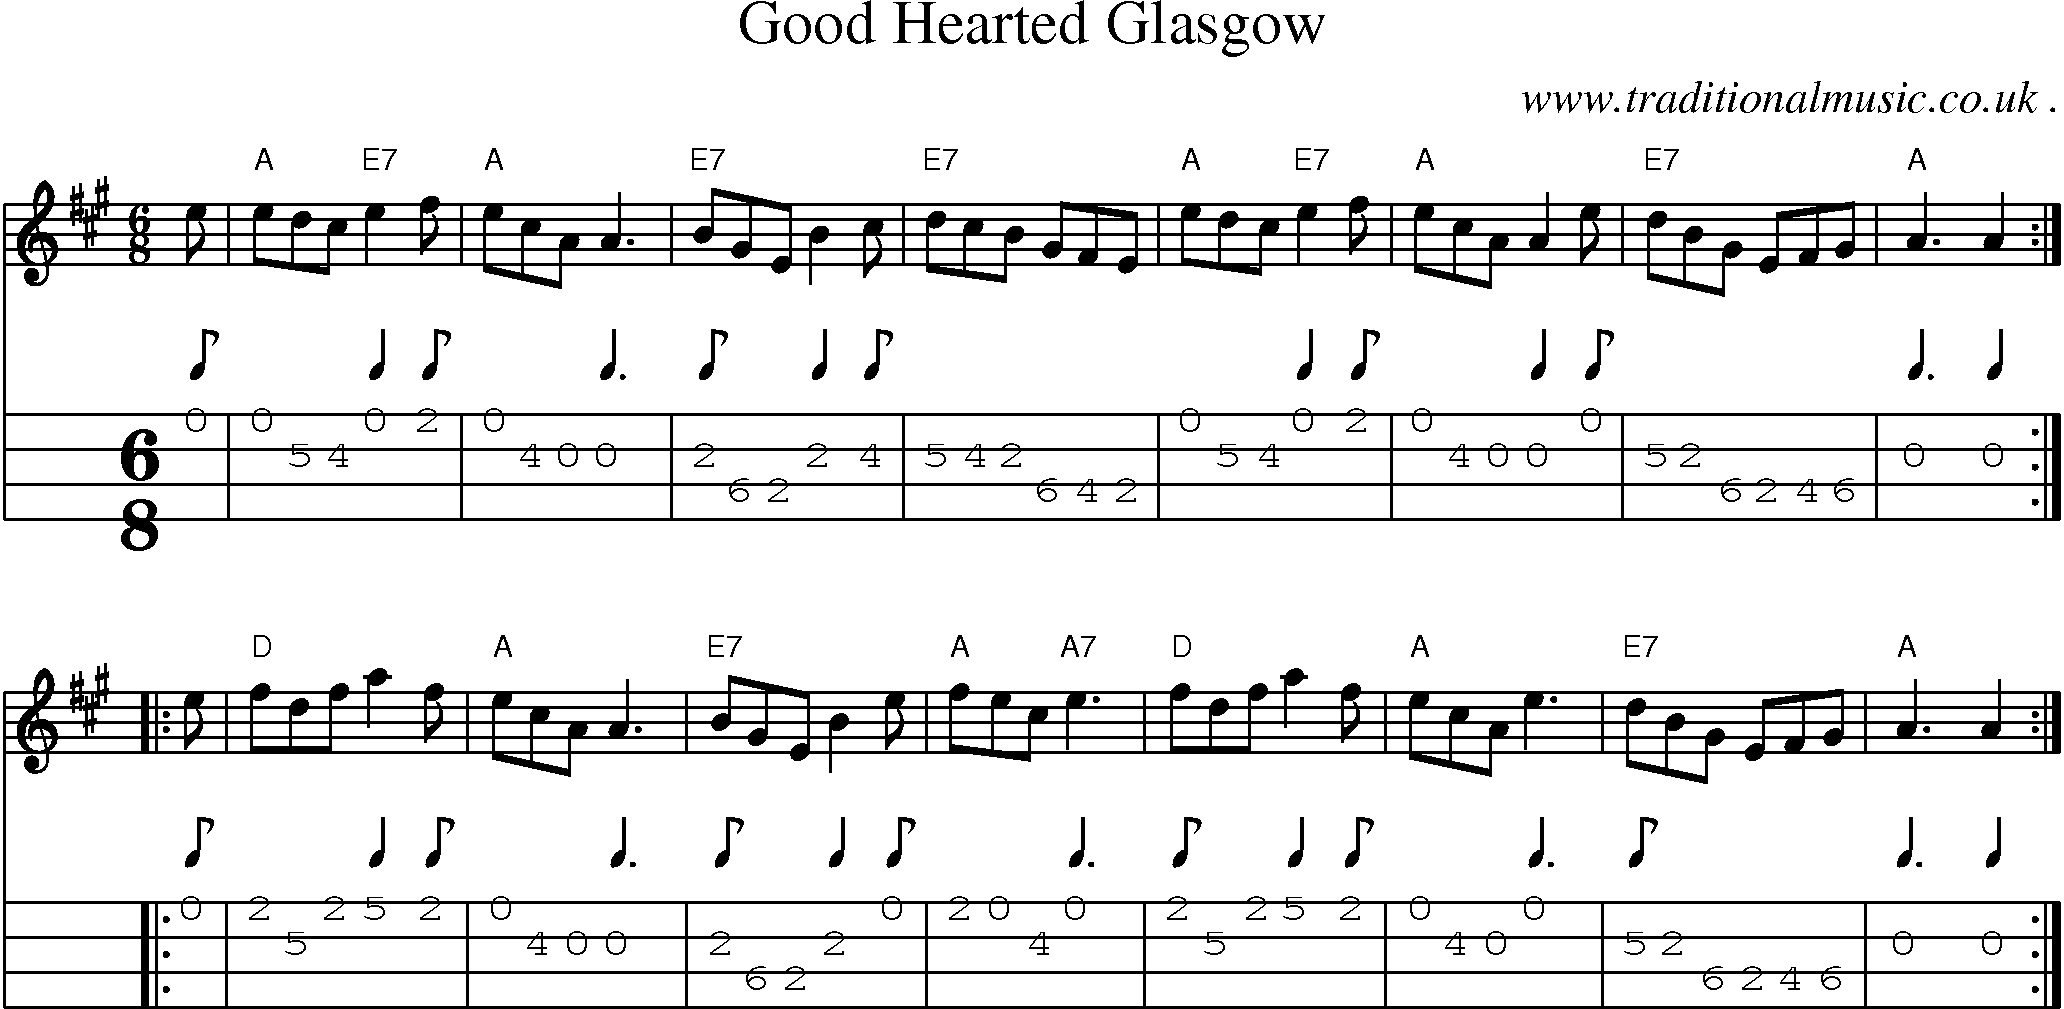 Sheet-music  score, Chords and Mandolin Tabs for Good Hearted Glasgow